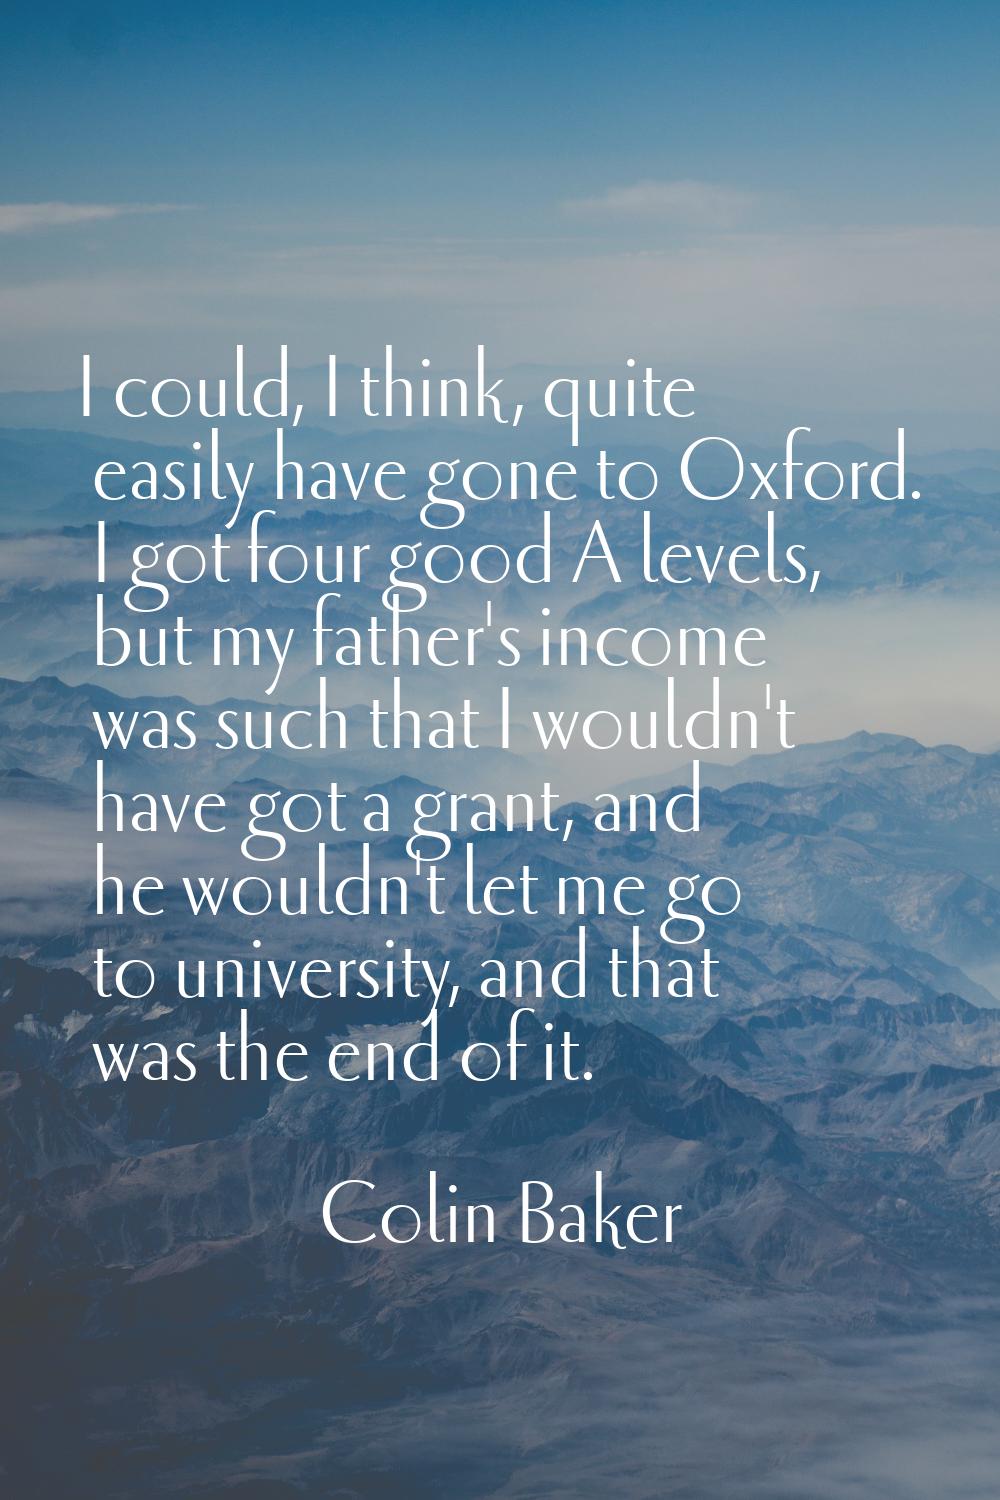 I could, I think, quite easily have gone to Oxford. I got four good A levels, but my father's incom